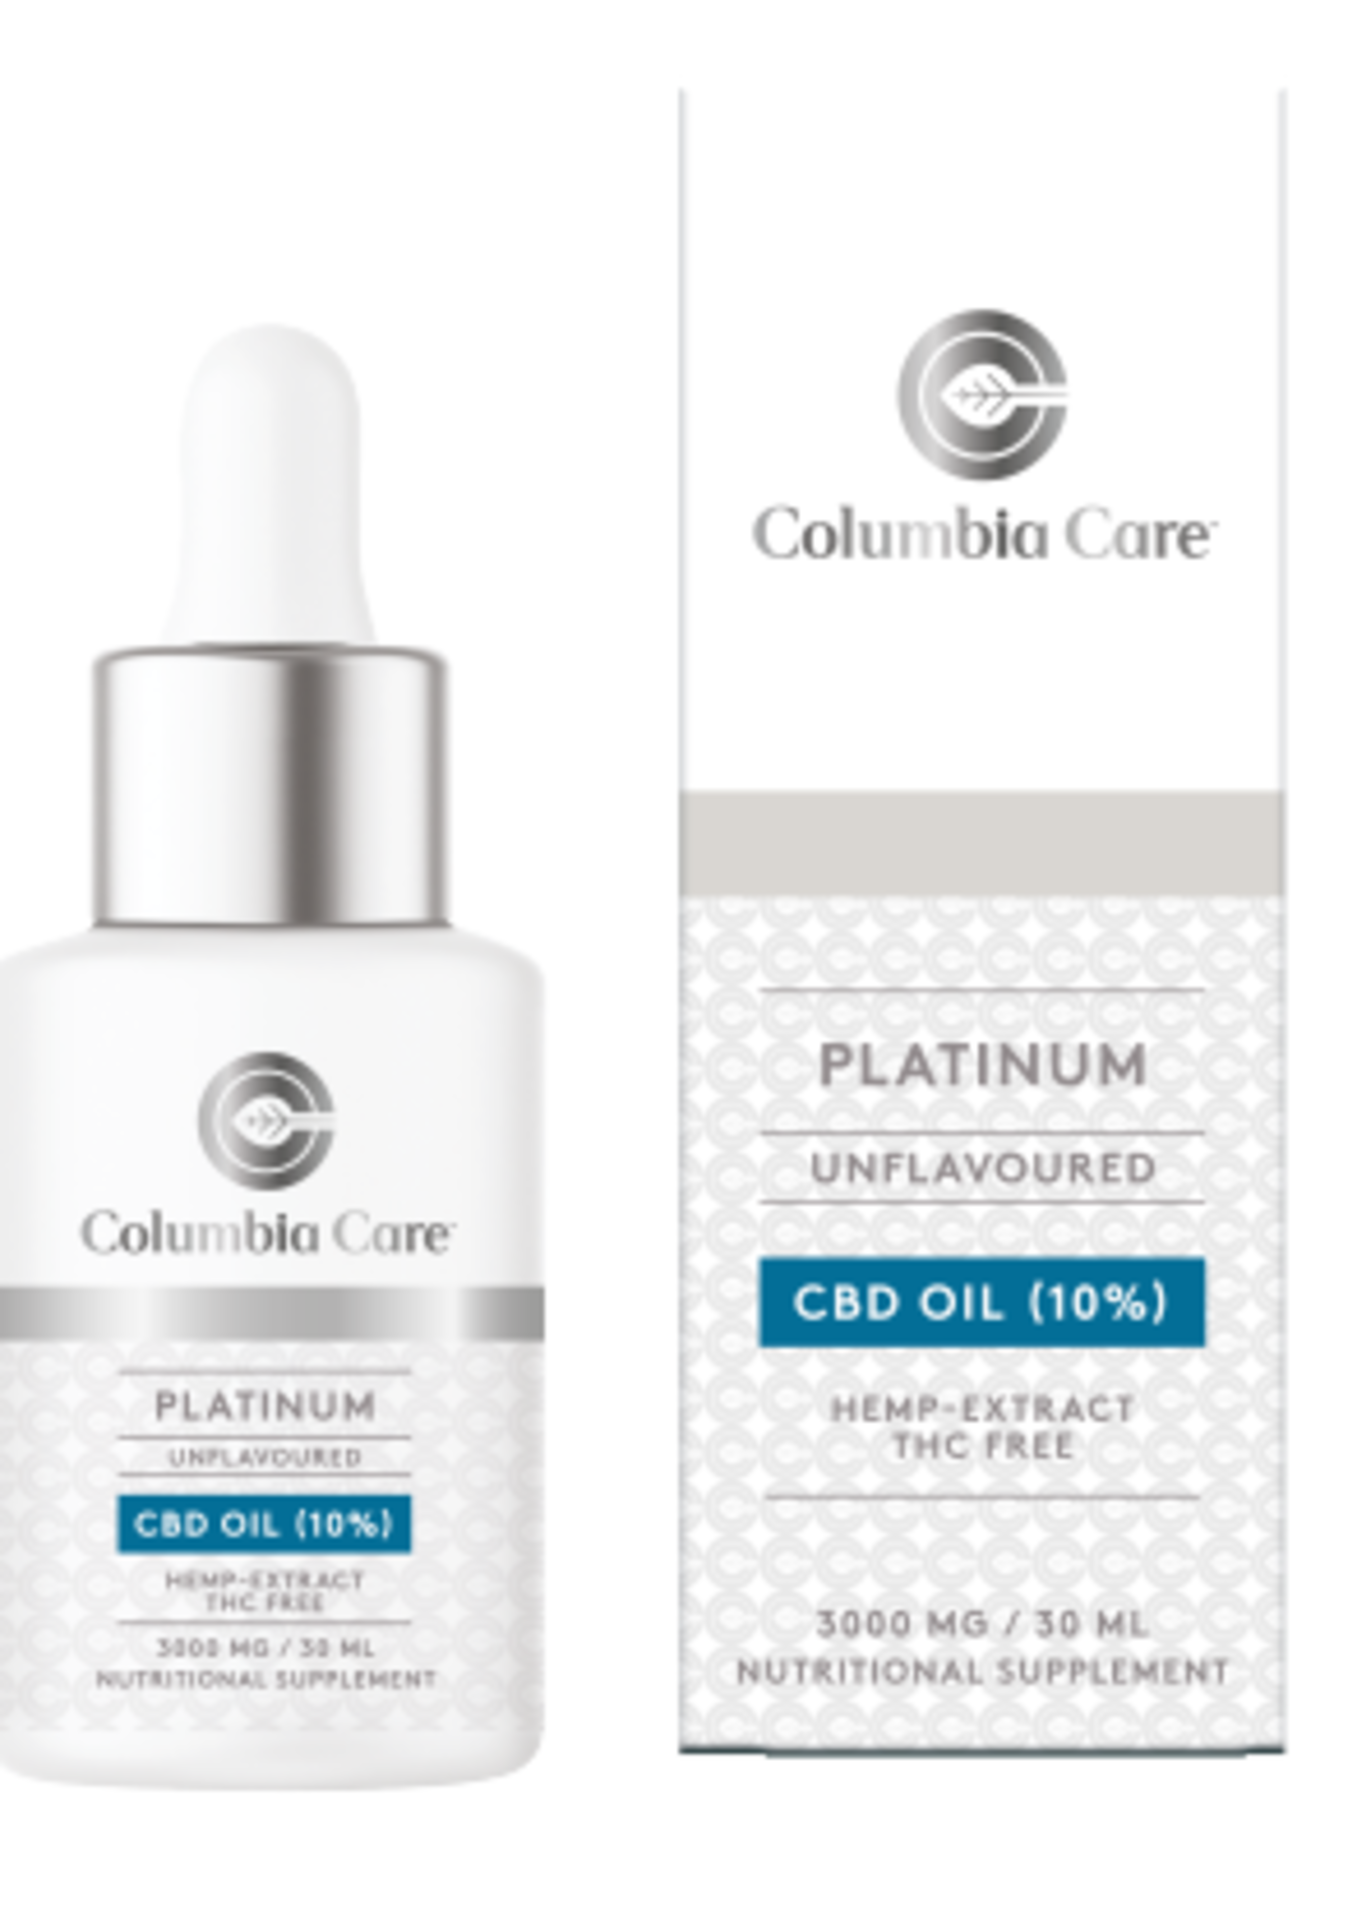 10 x Brand New Columbia Care Platinum Unflavoured Flavored Tincture 30ml 3000mg. Columbia Care, a